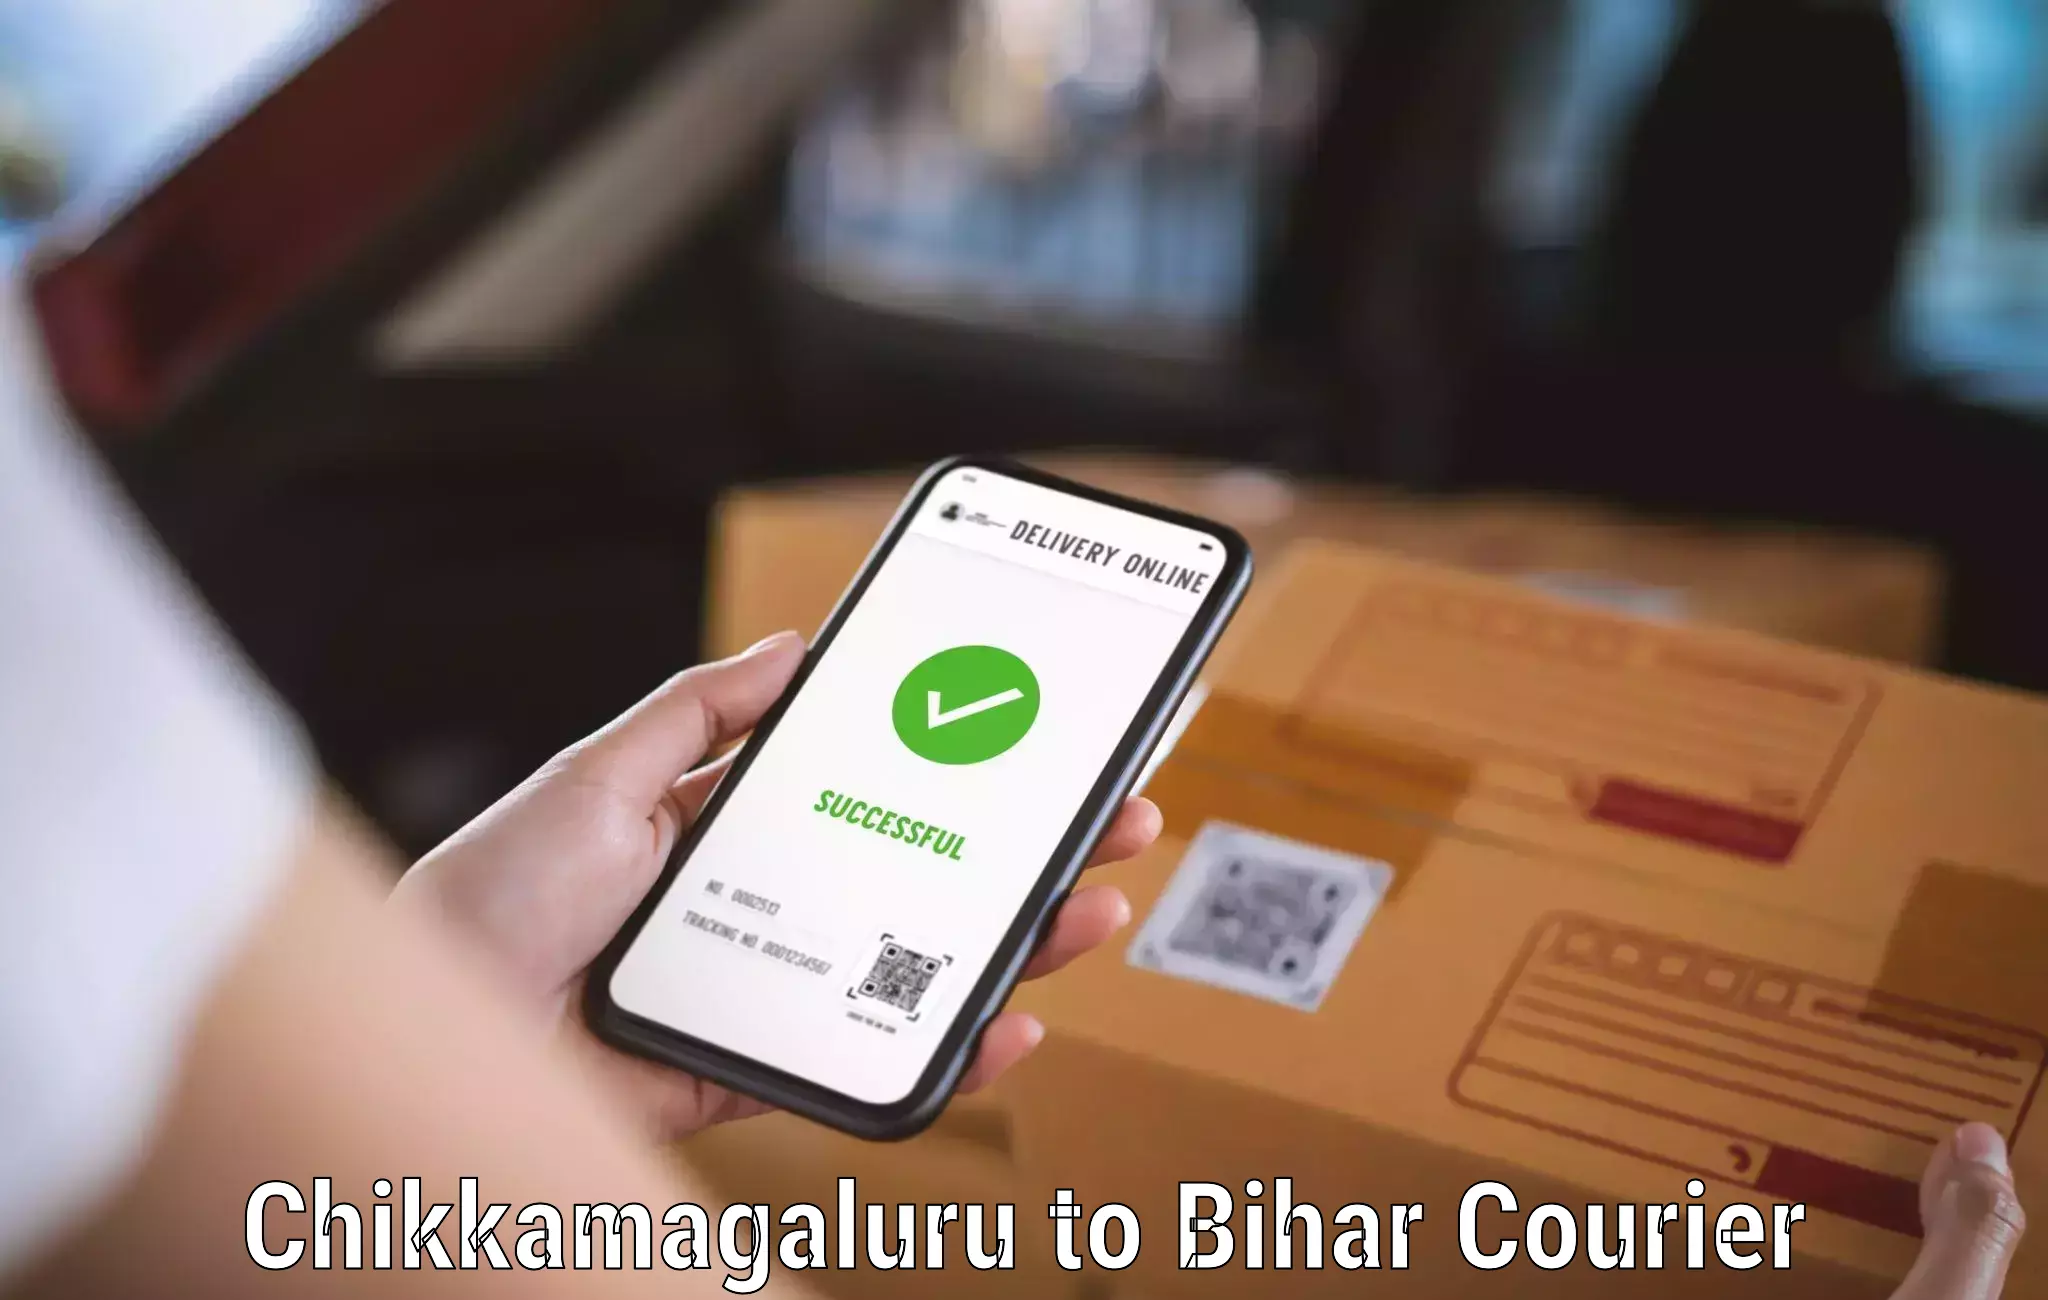 Fast delivery service Chikkamagaluru to Barbigha